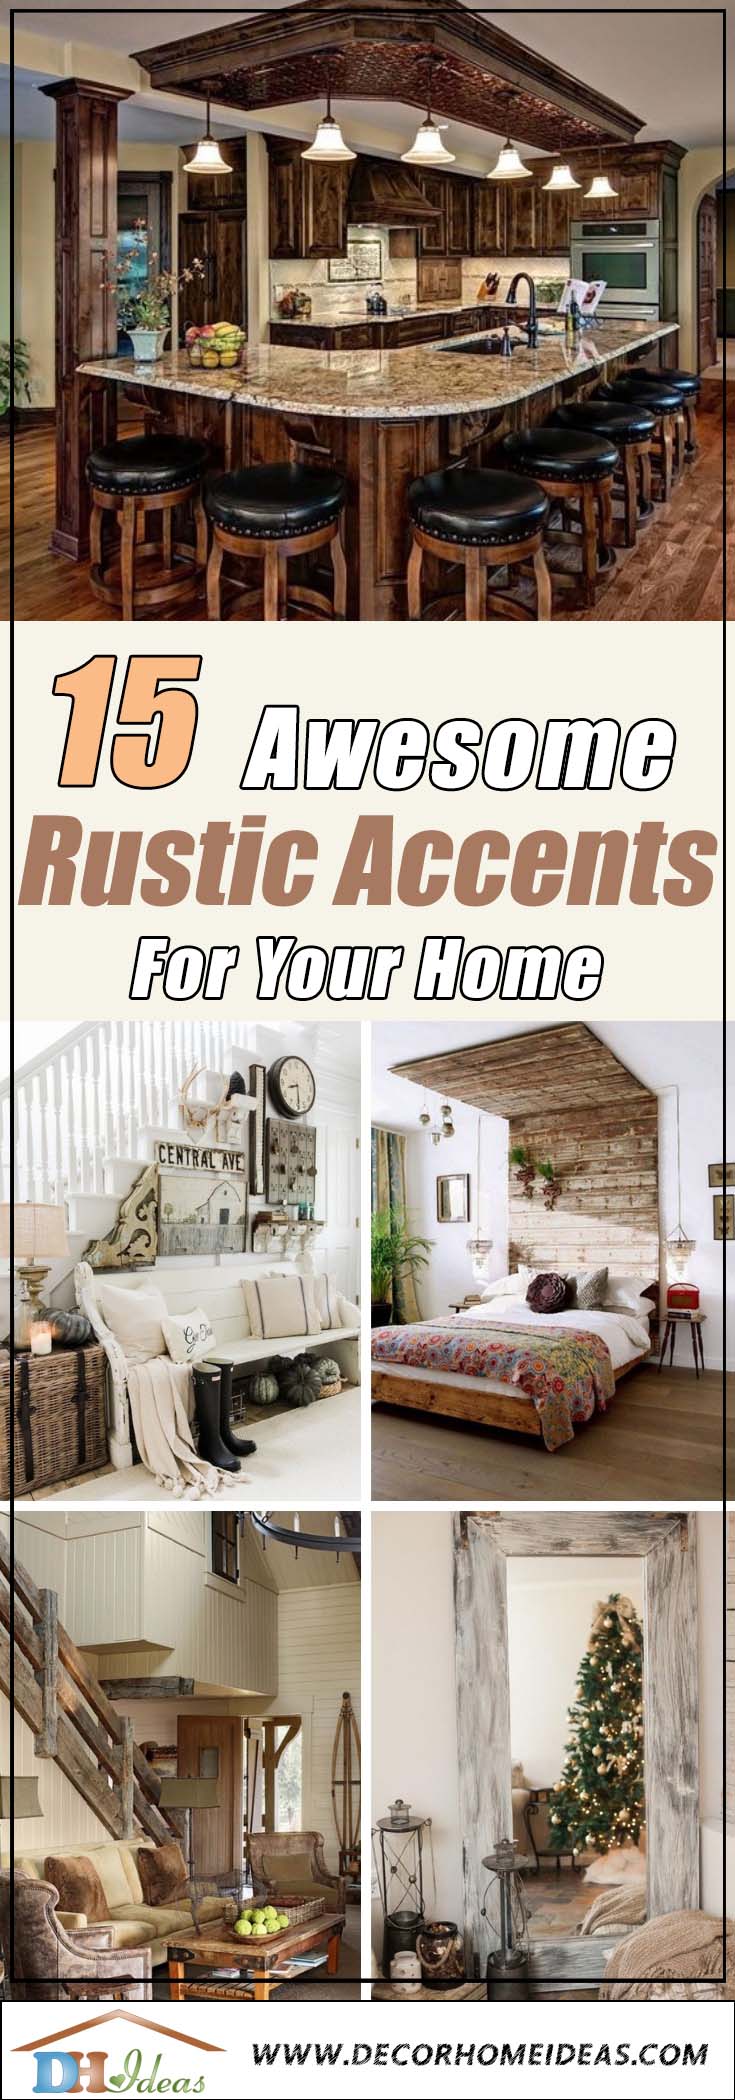 15 Rustic Accents To Bring Warmth to Your Home | Get some rustic look at home with these ideas and tips. #rustic #rusticdecor #rusticfarmhouse #homedecor #decoratingideas #decorhomeideas